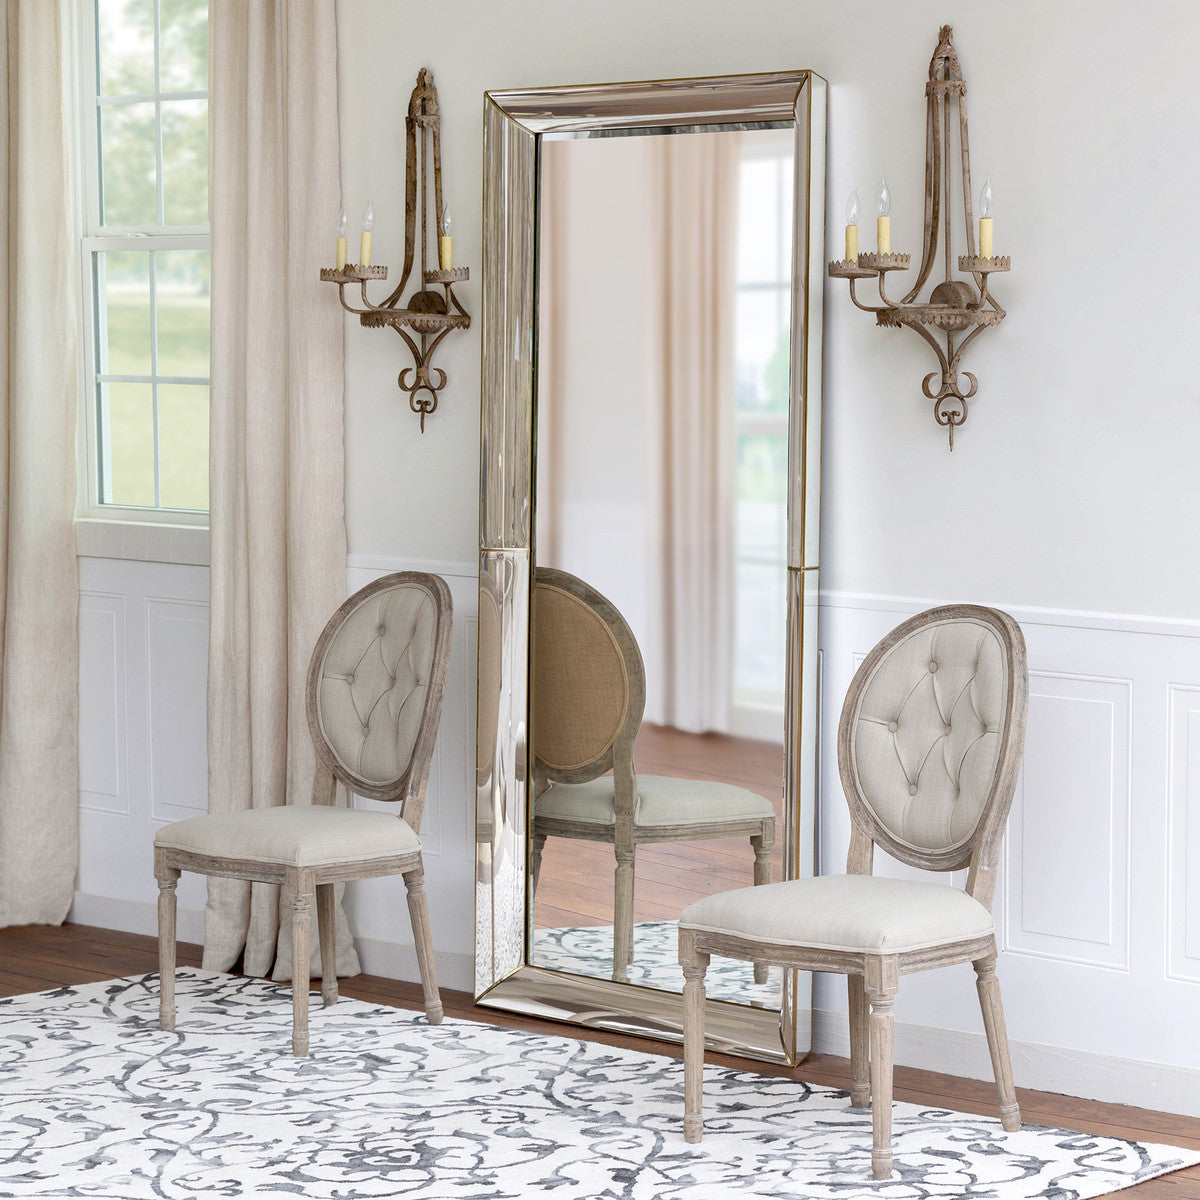 luxe floor mirror sconces two chairs rug